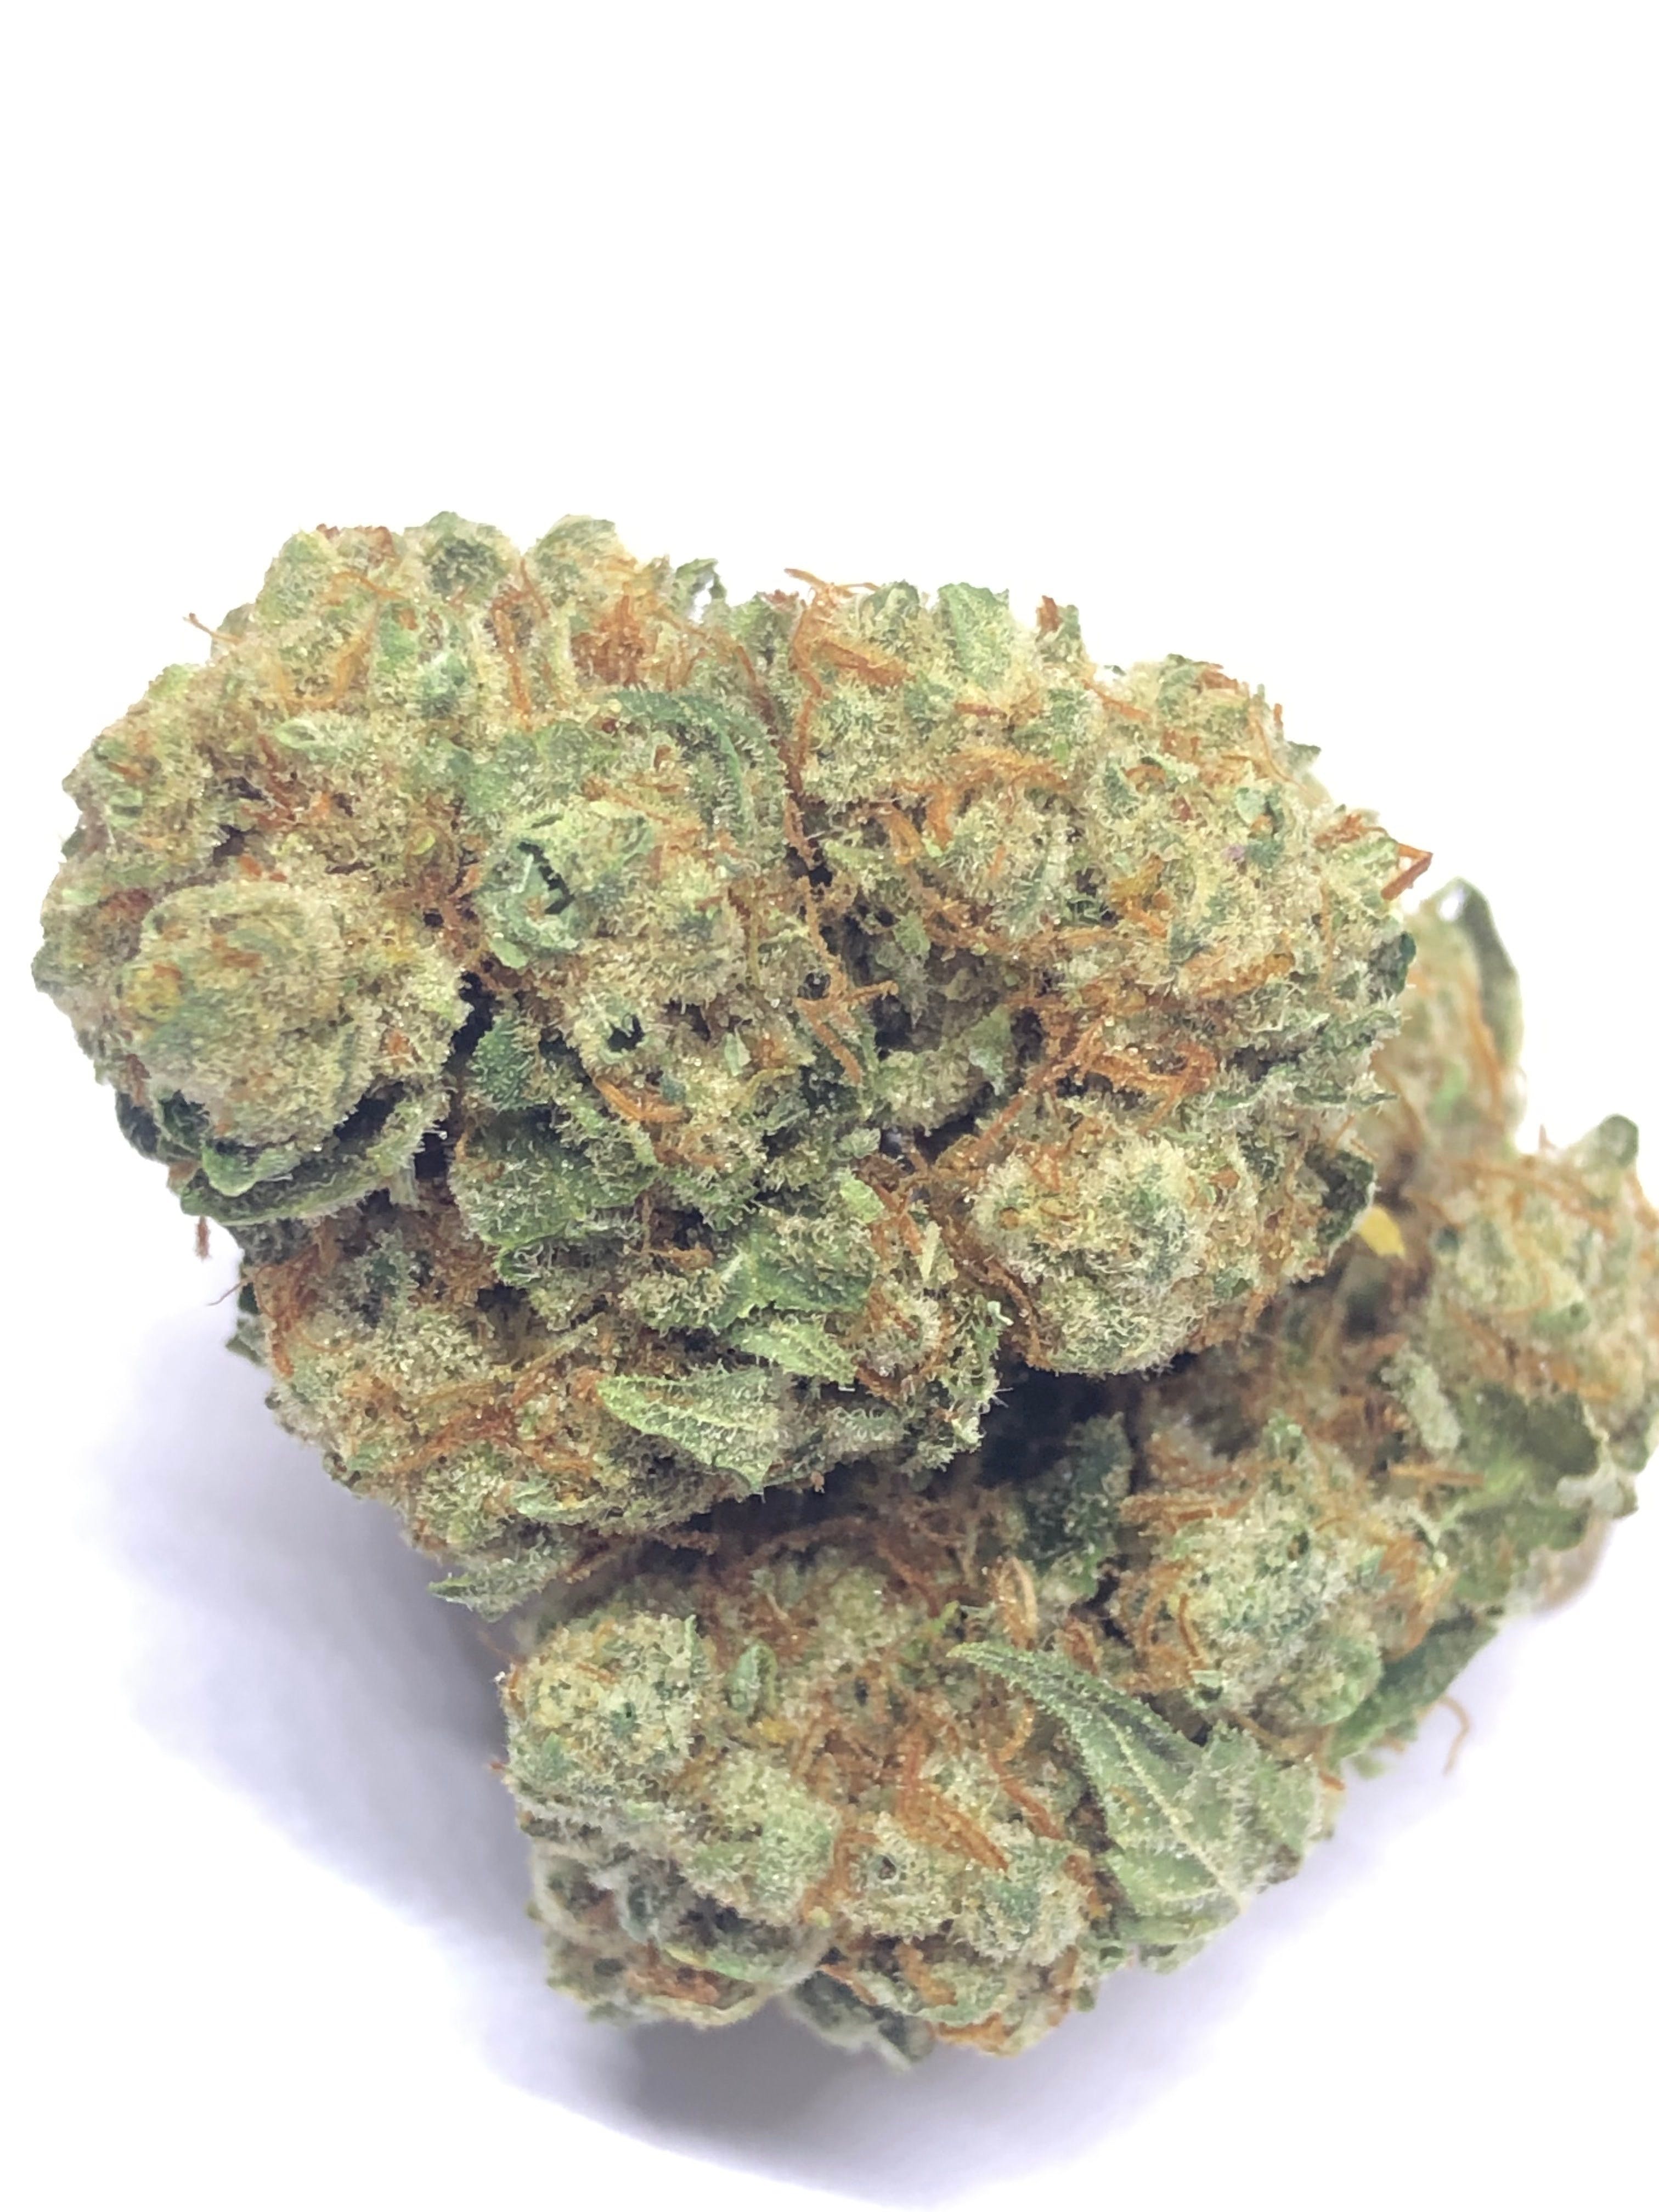 marijuana-dispensaries-5024-vineland-ave-north-hollywood-exclusive-death-master-kush-6g-for-30-special